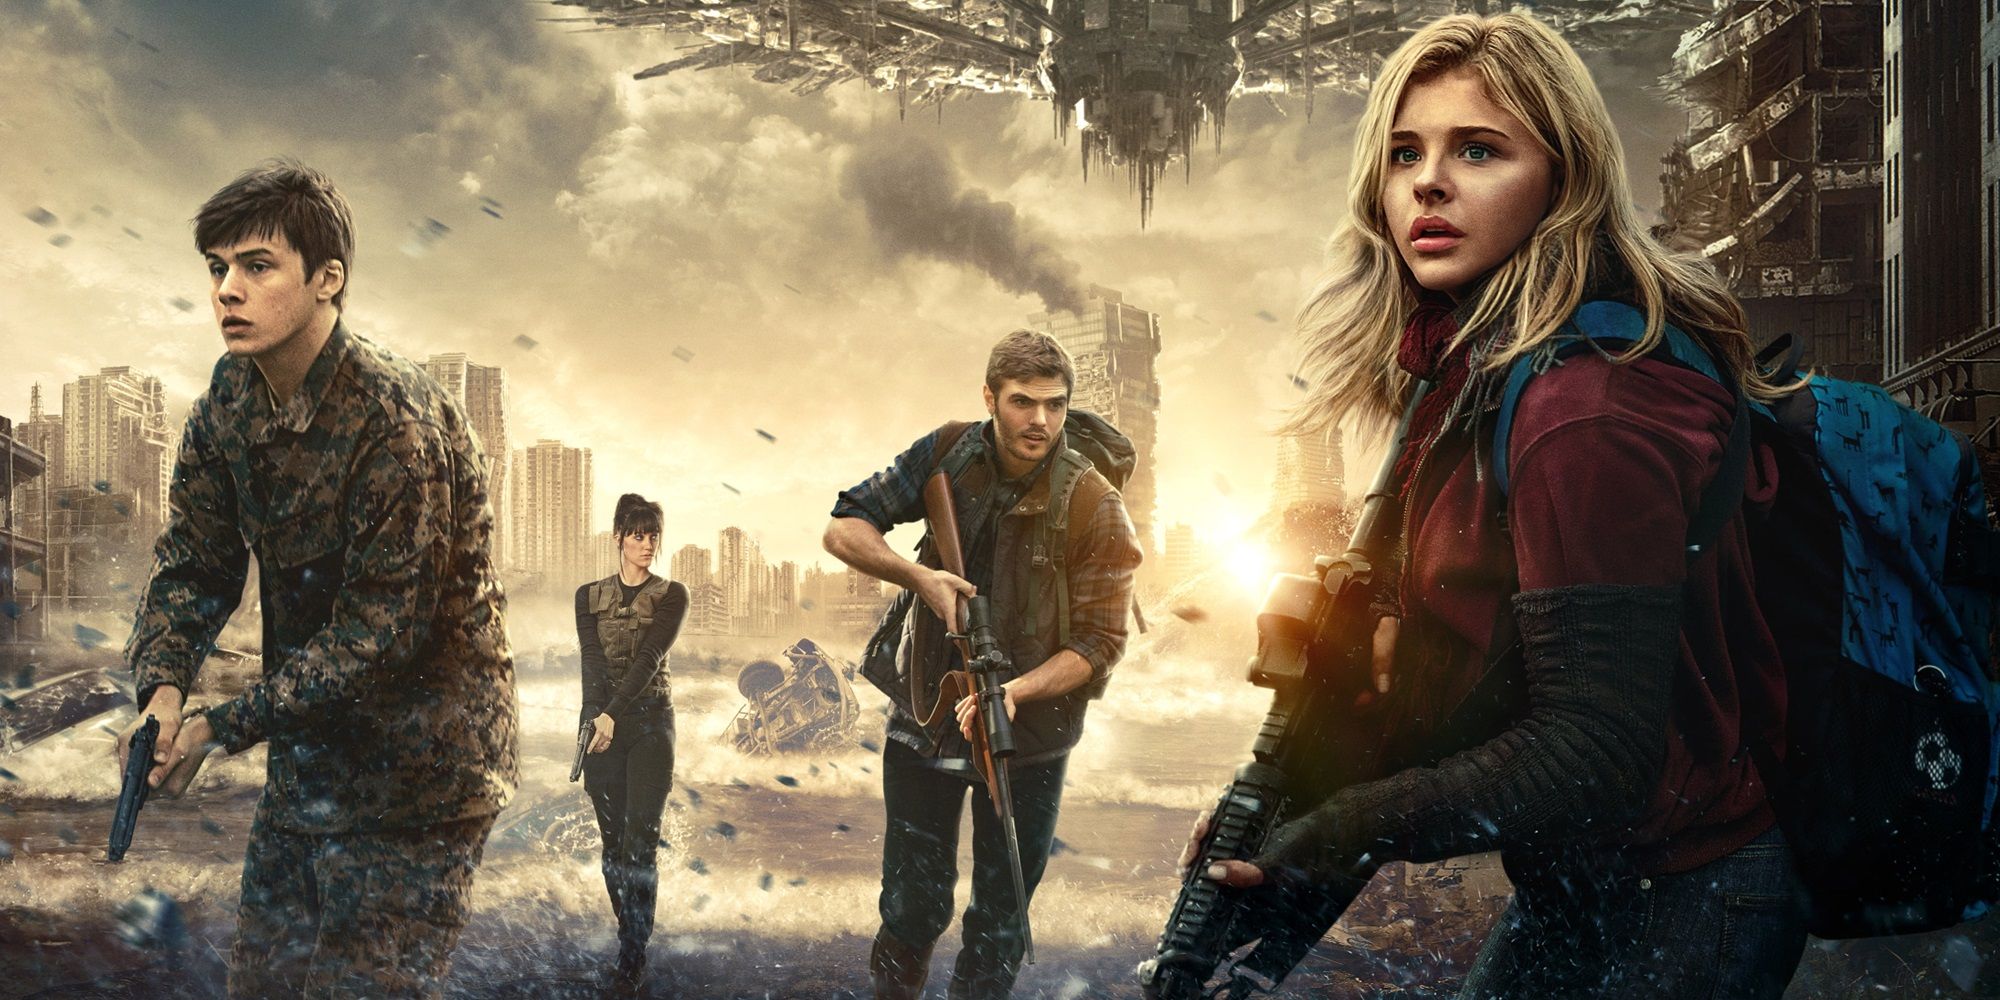 The poster for The 5th Wave